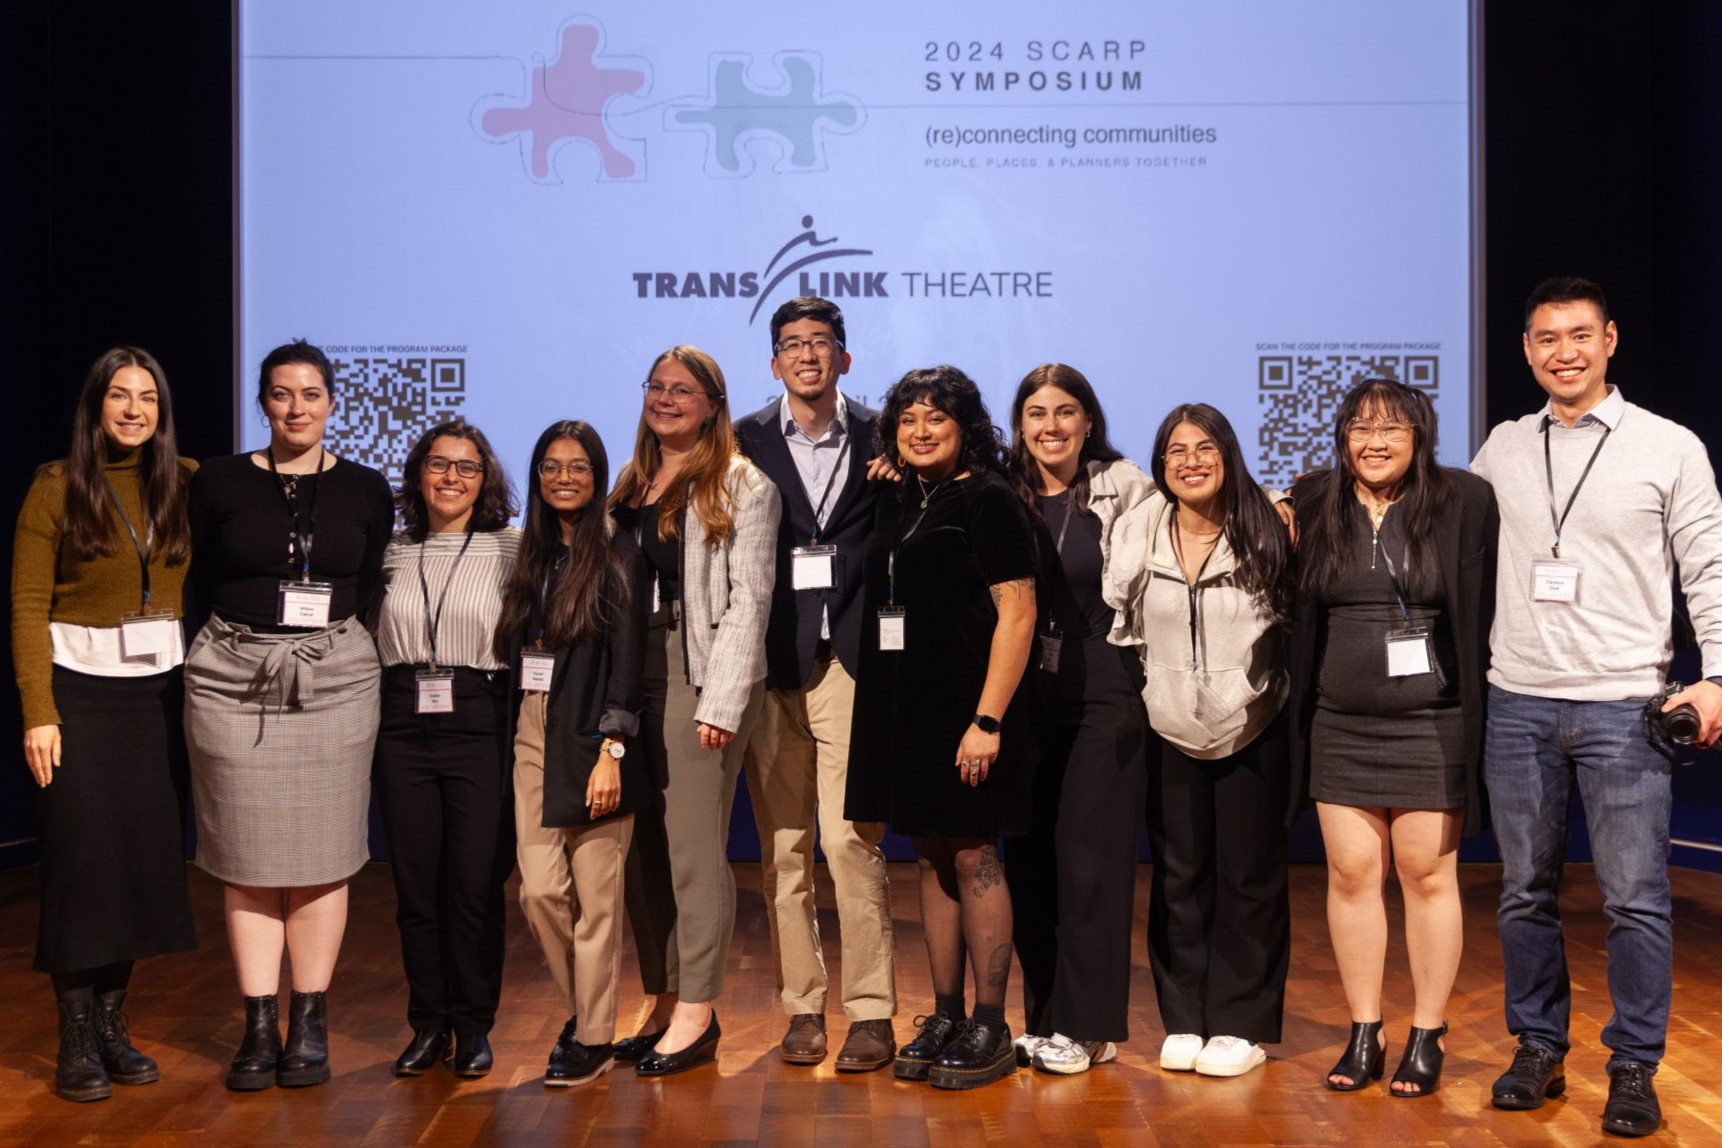 Students arm-in-arm on stage, in front of "SCARP Symposium" logo